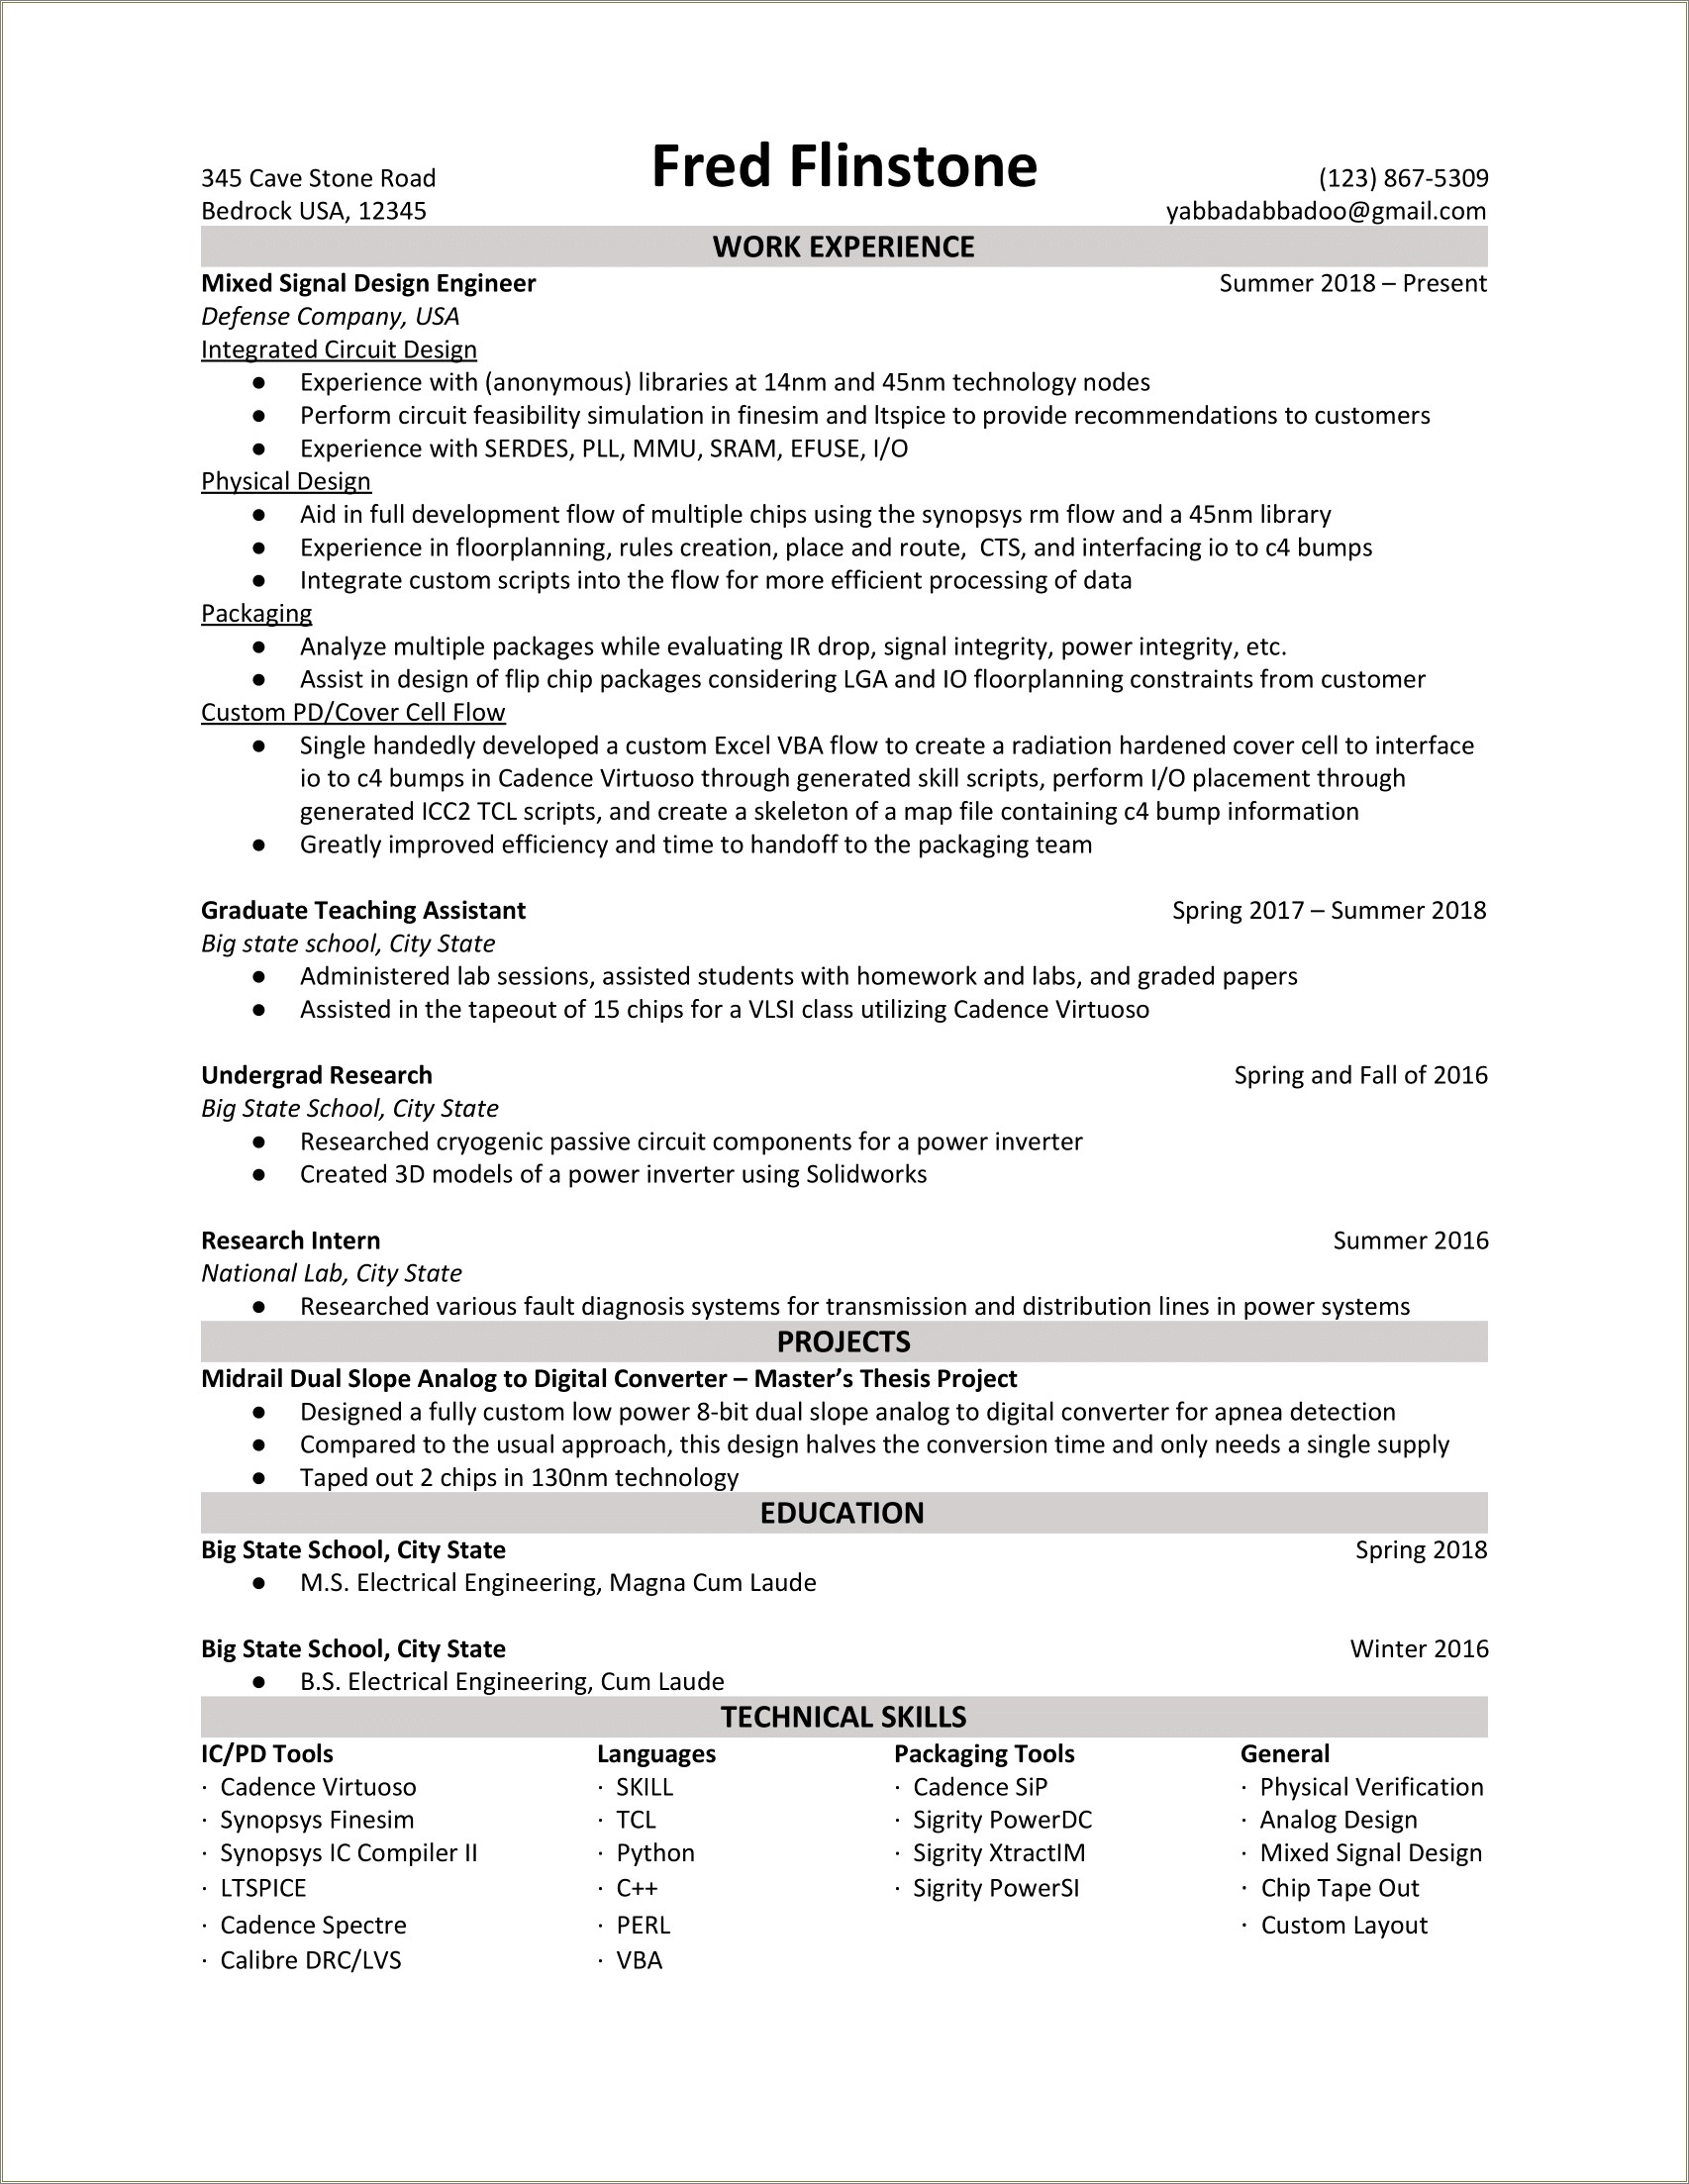 2 Year Experience Resume Format For Electrical Engineer